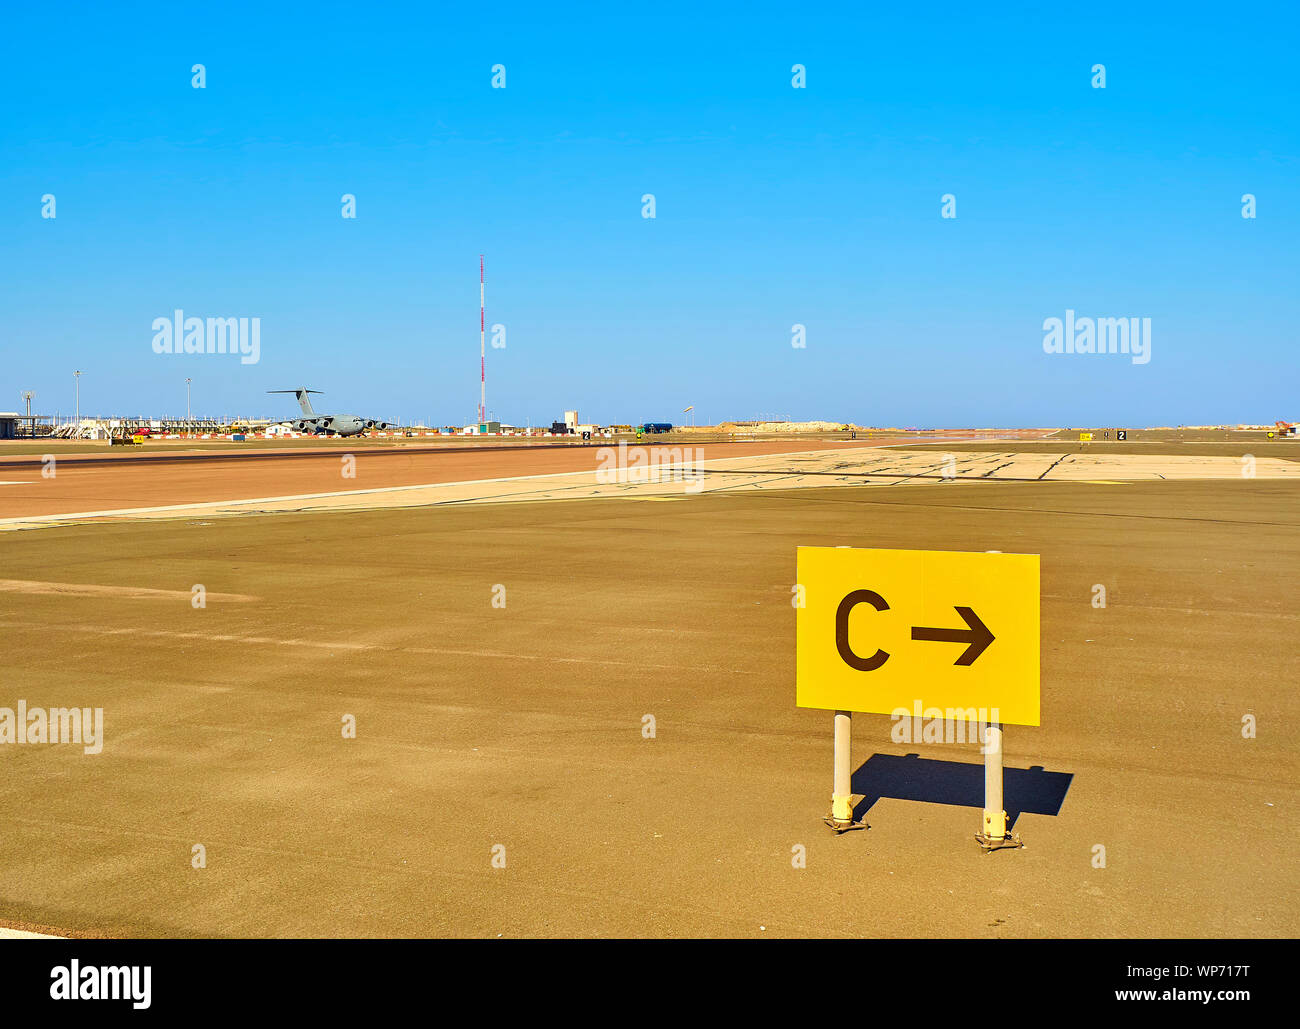 A runway of a Airport with a military airplane in the background and a Taxiway Location Sign in the foreground. Stock Photo